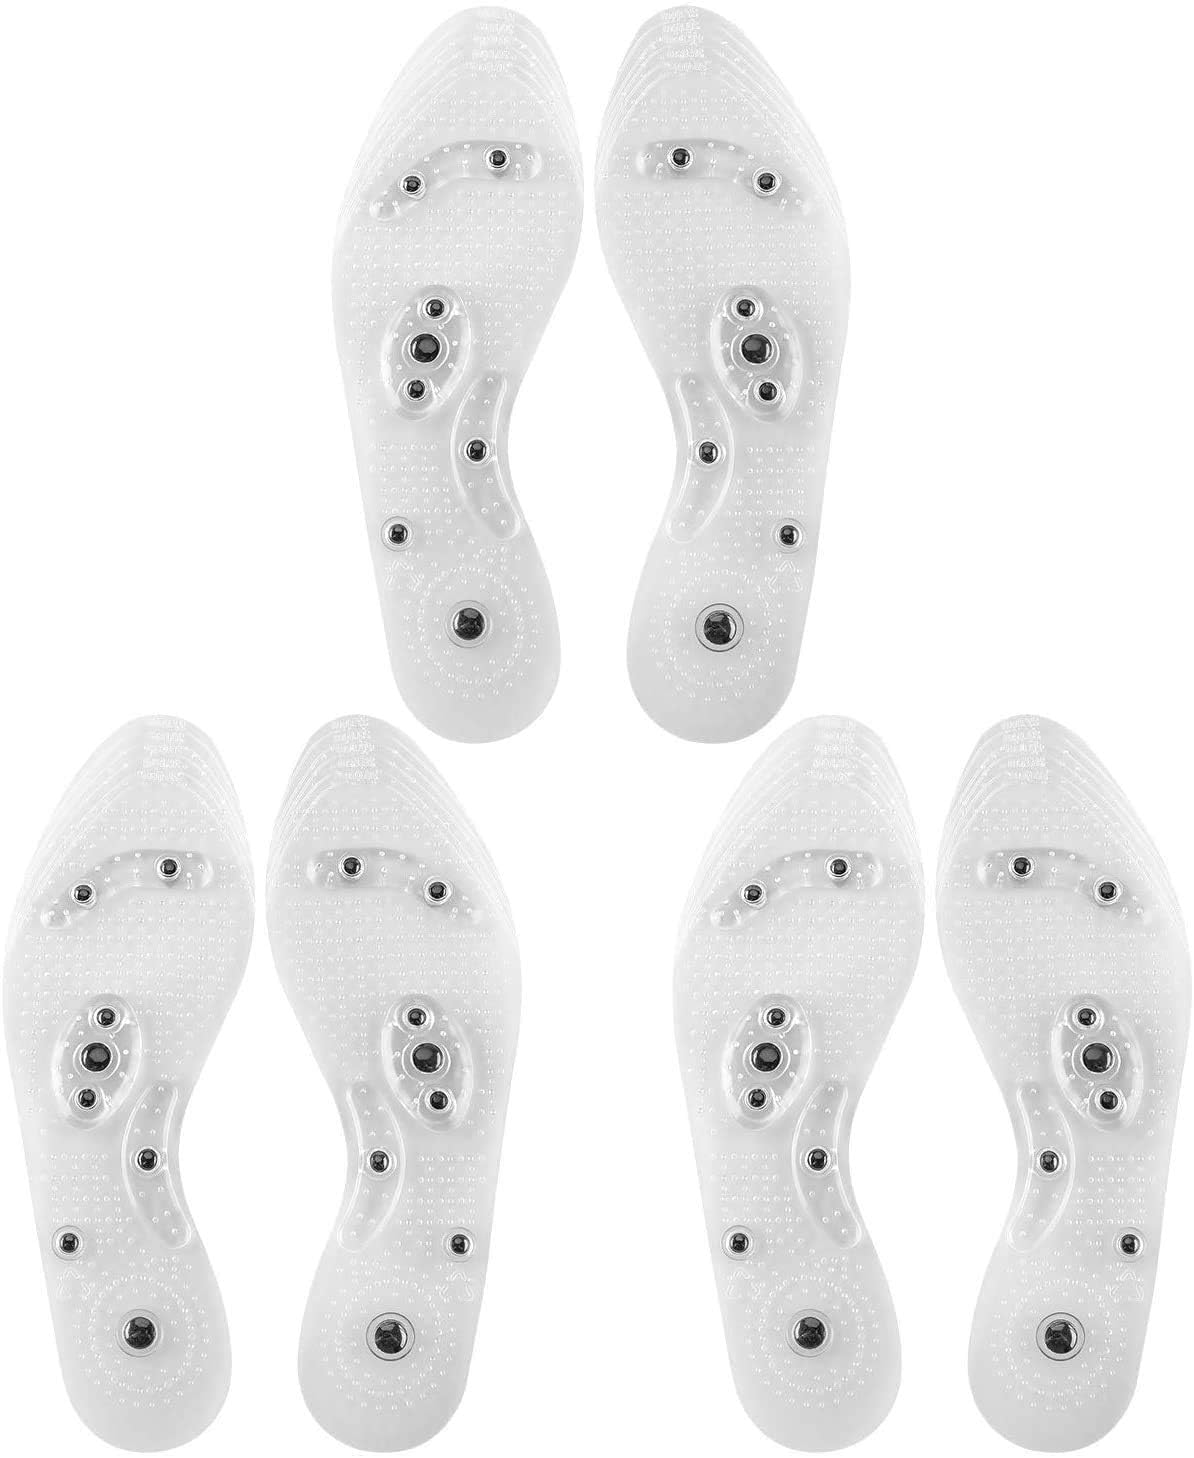 3 Pairs Acupressure Magnetic Massage Insoles, Oumers Foot Massage Shoe-pad Foot Therapy Reflexology Pain Relief Shoe Insoles,Transparent (US M:7-9 W:8-10)